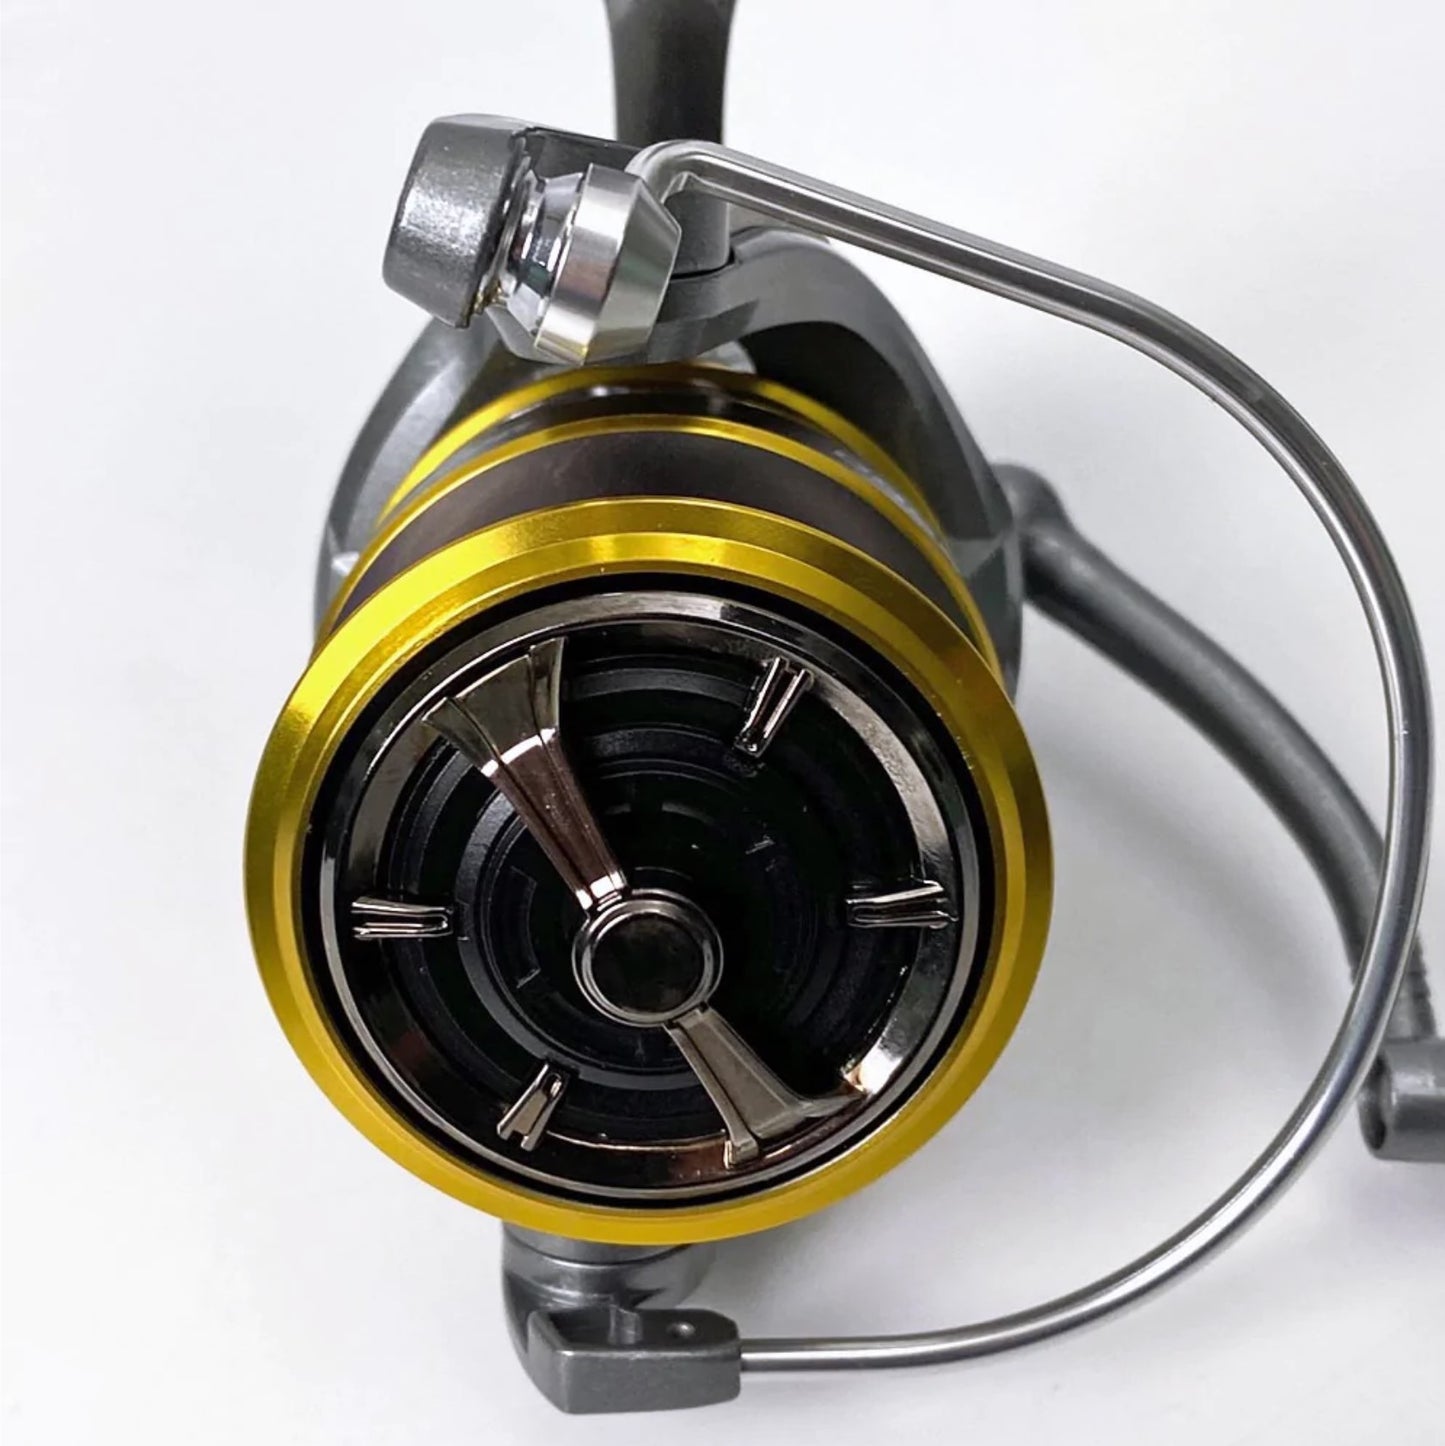 Banax Primo 2500 Spinning Reel